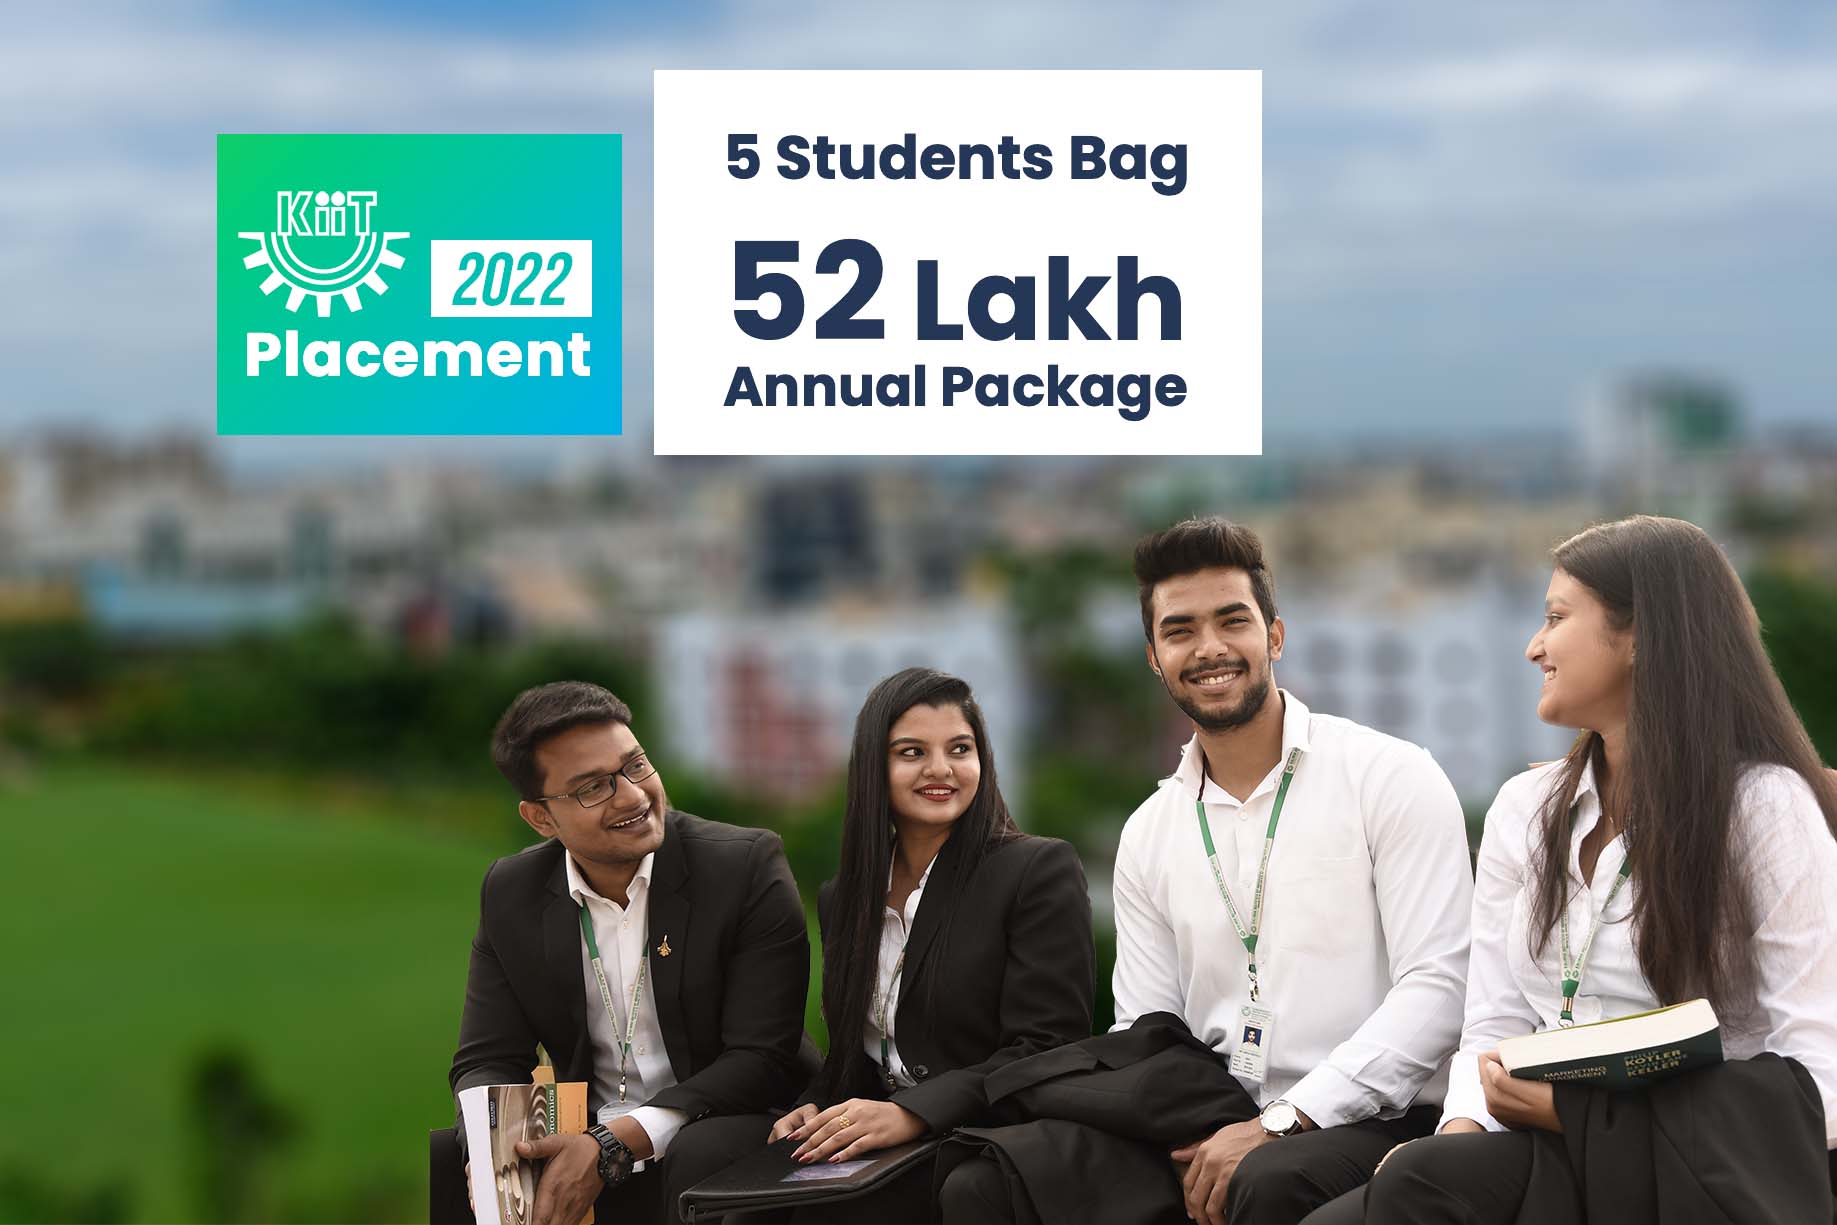 KIIT Placement 2022 53 Lakh Package